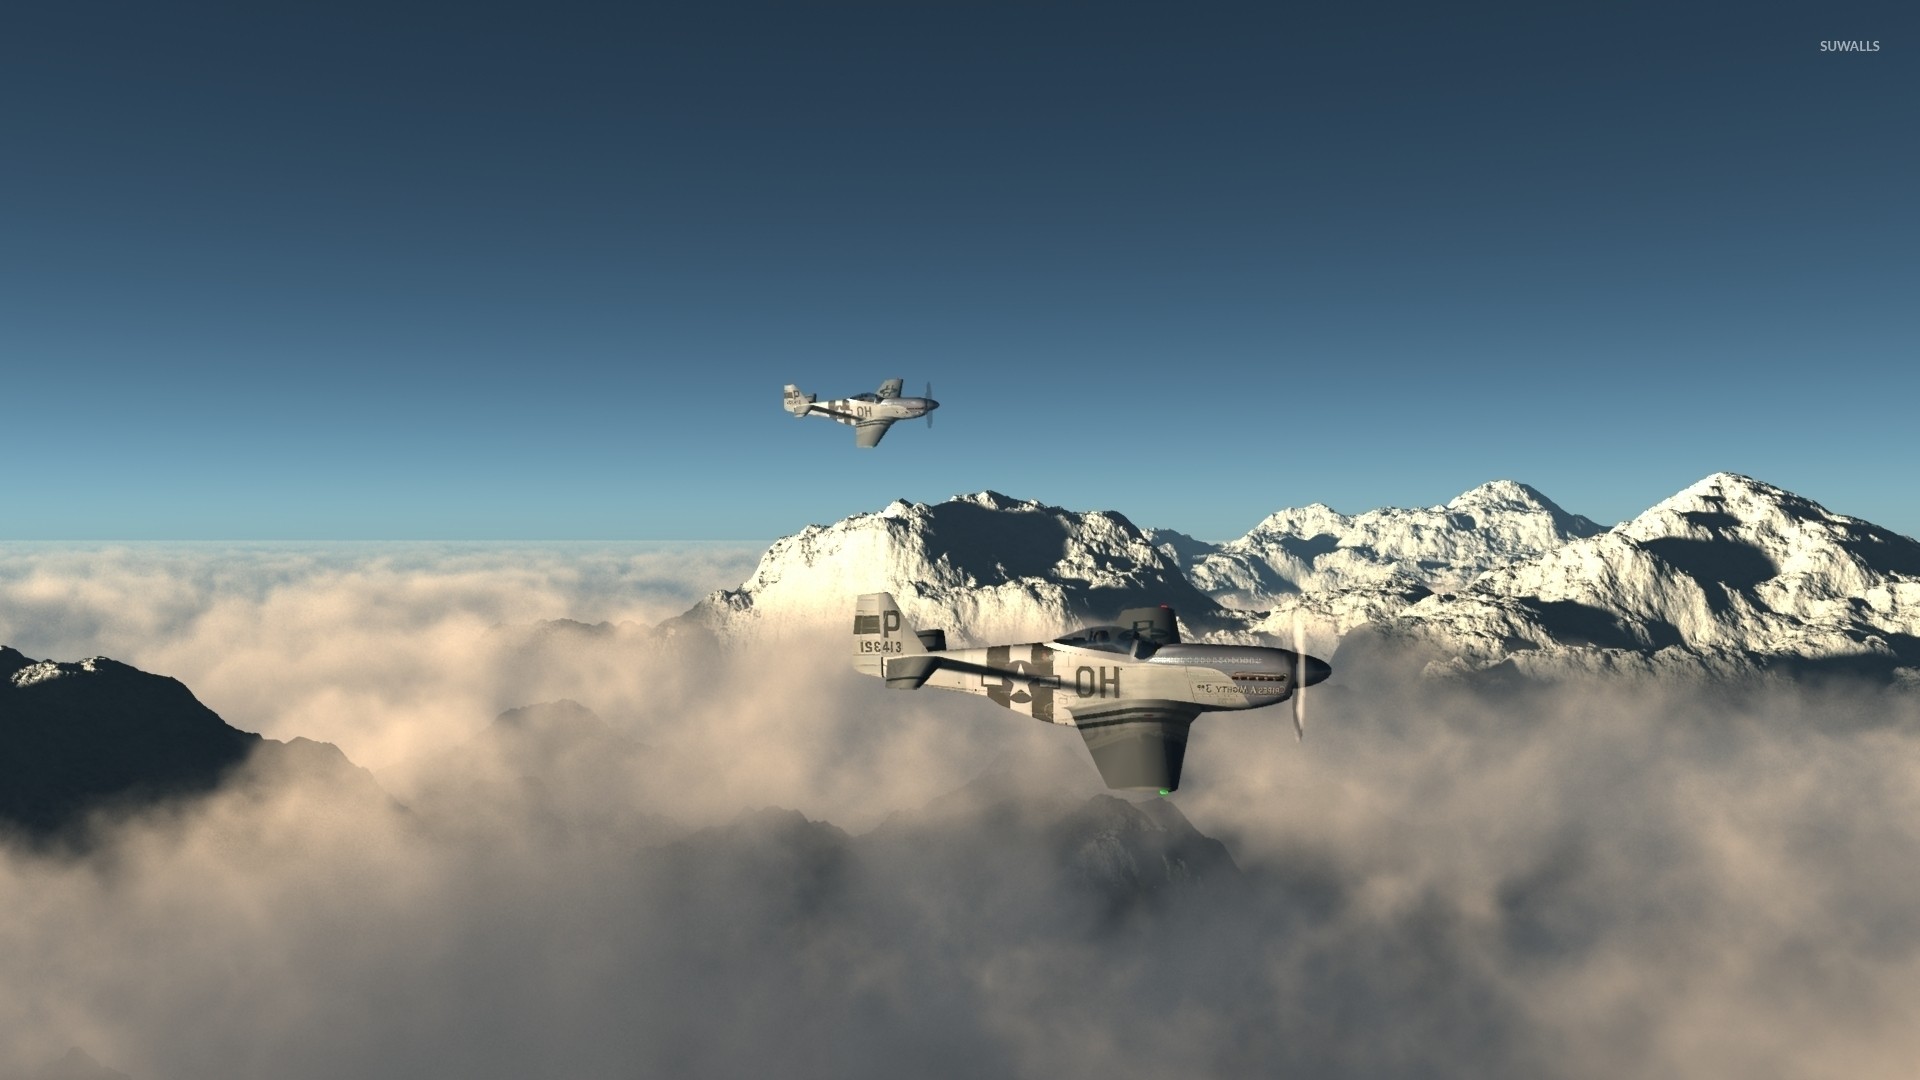 1920x1080 North American P-51 Mustang above the foggy mountain peaks wallpaper